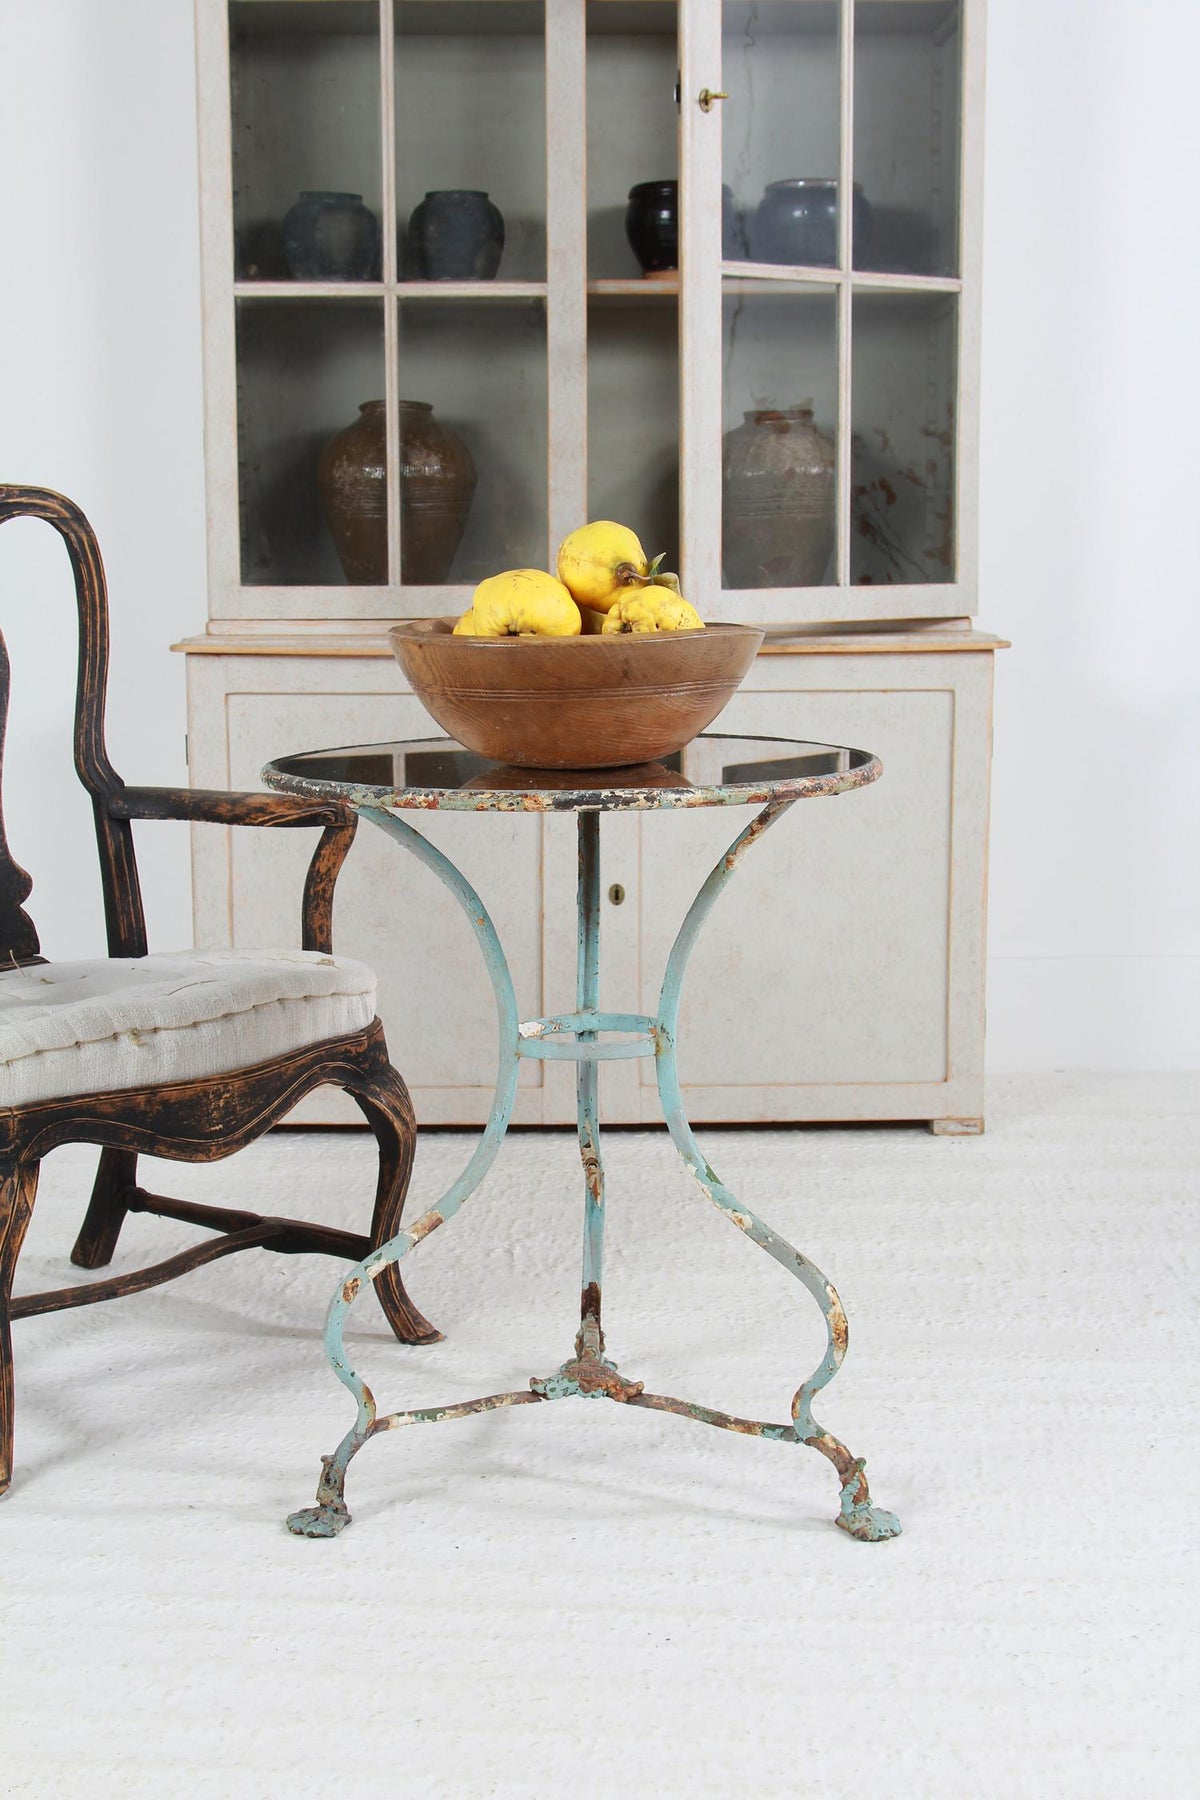 FRENCH 19THC ARRAS IRON TABLE WITH DISTRESSED MIRRORED TOP